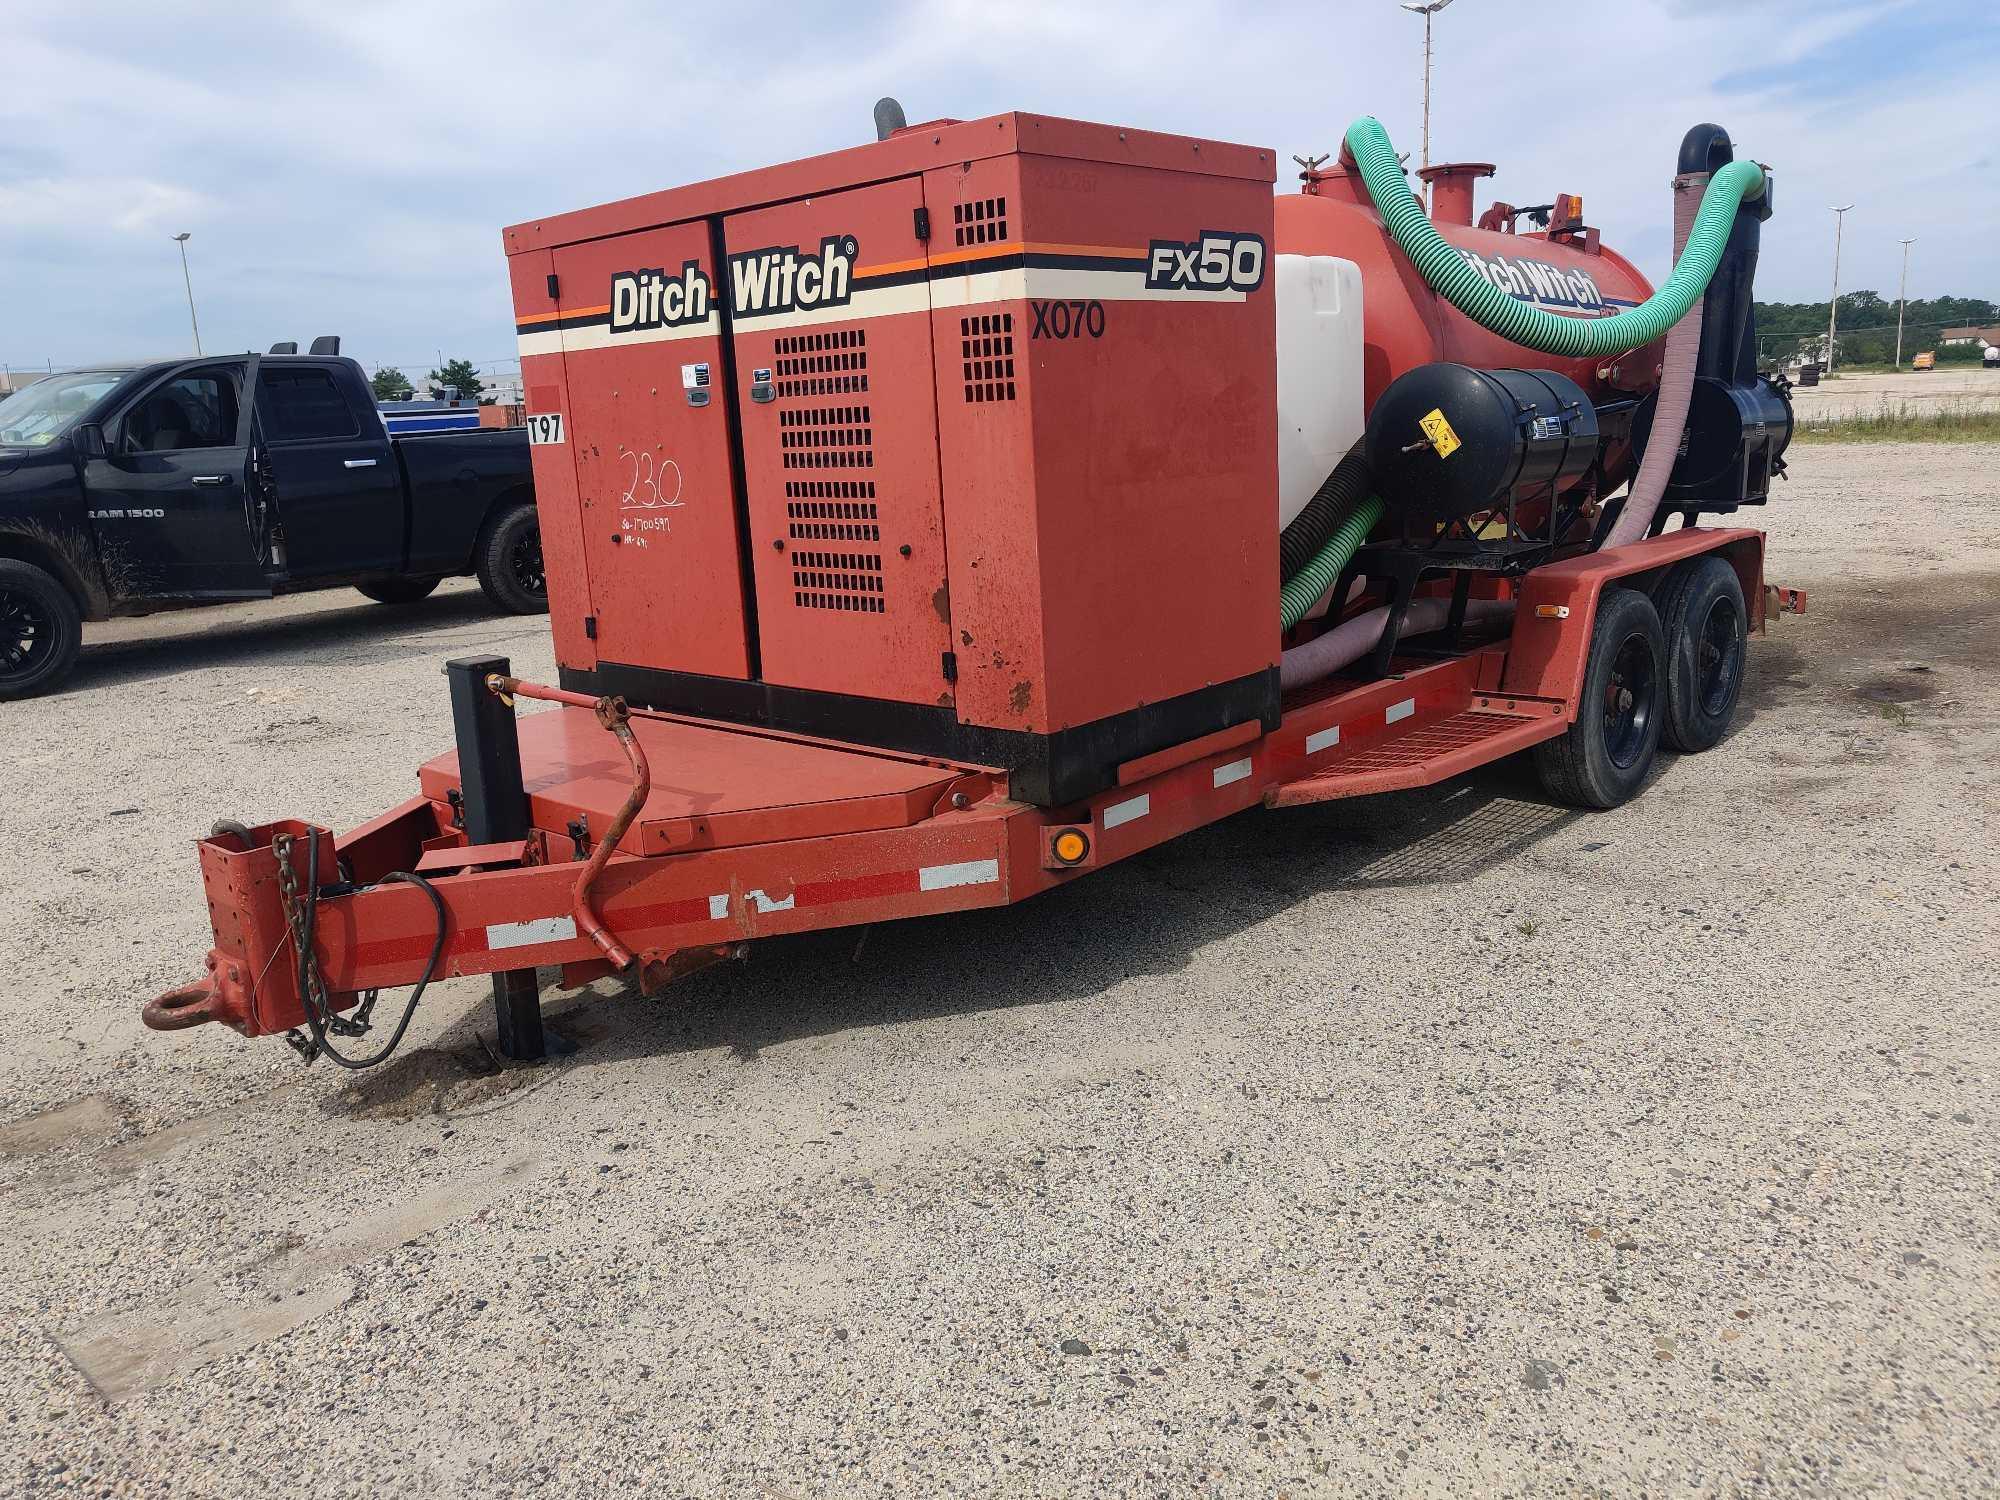 DITCH WITCH FX50 BORING EQUIPMENT SN:E1700597 Powered